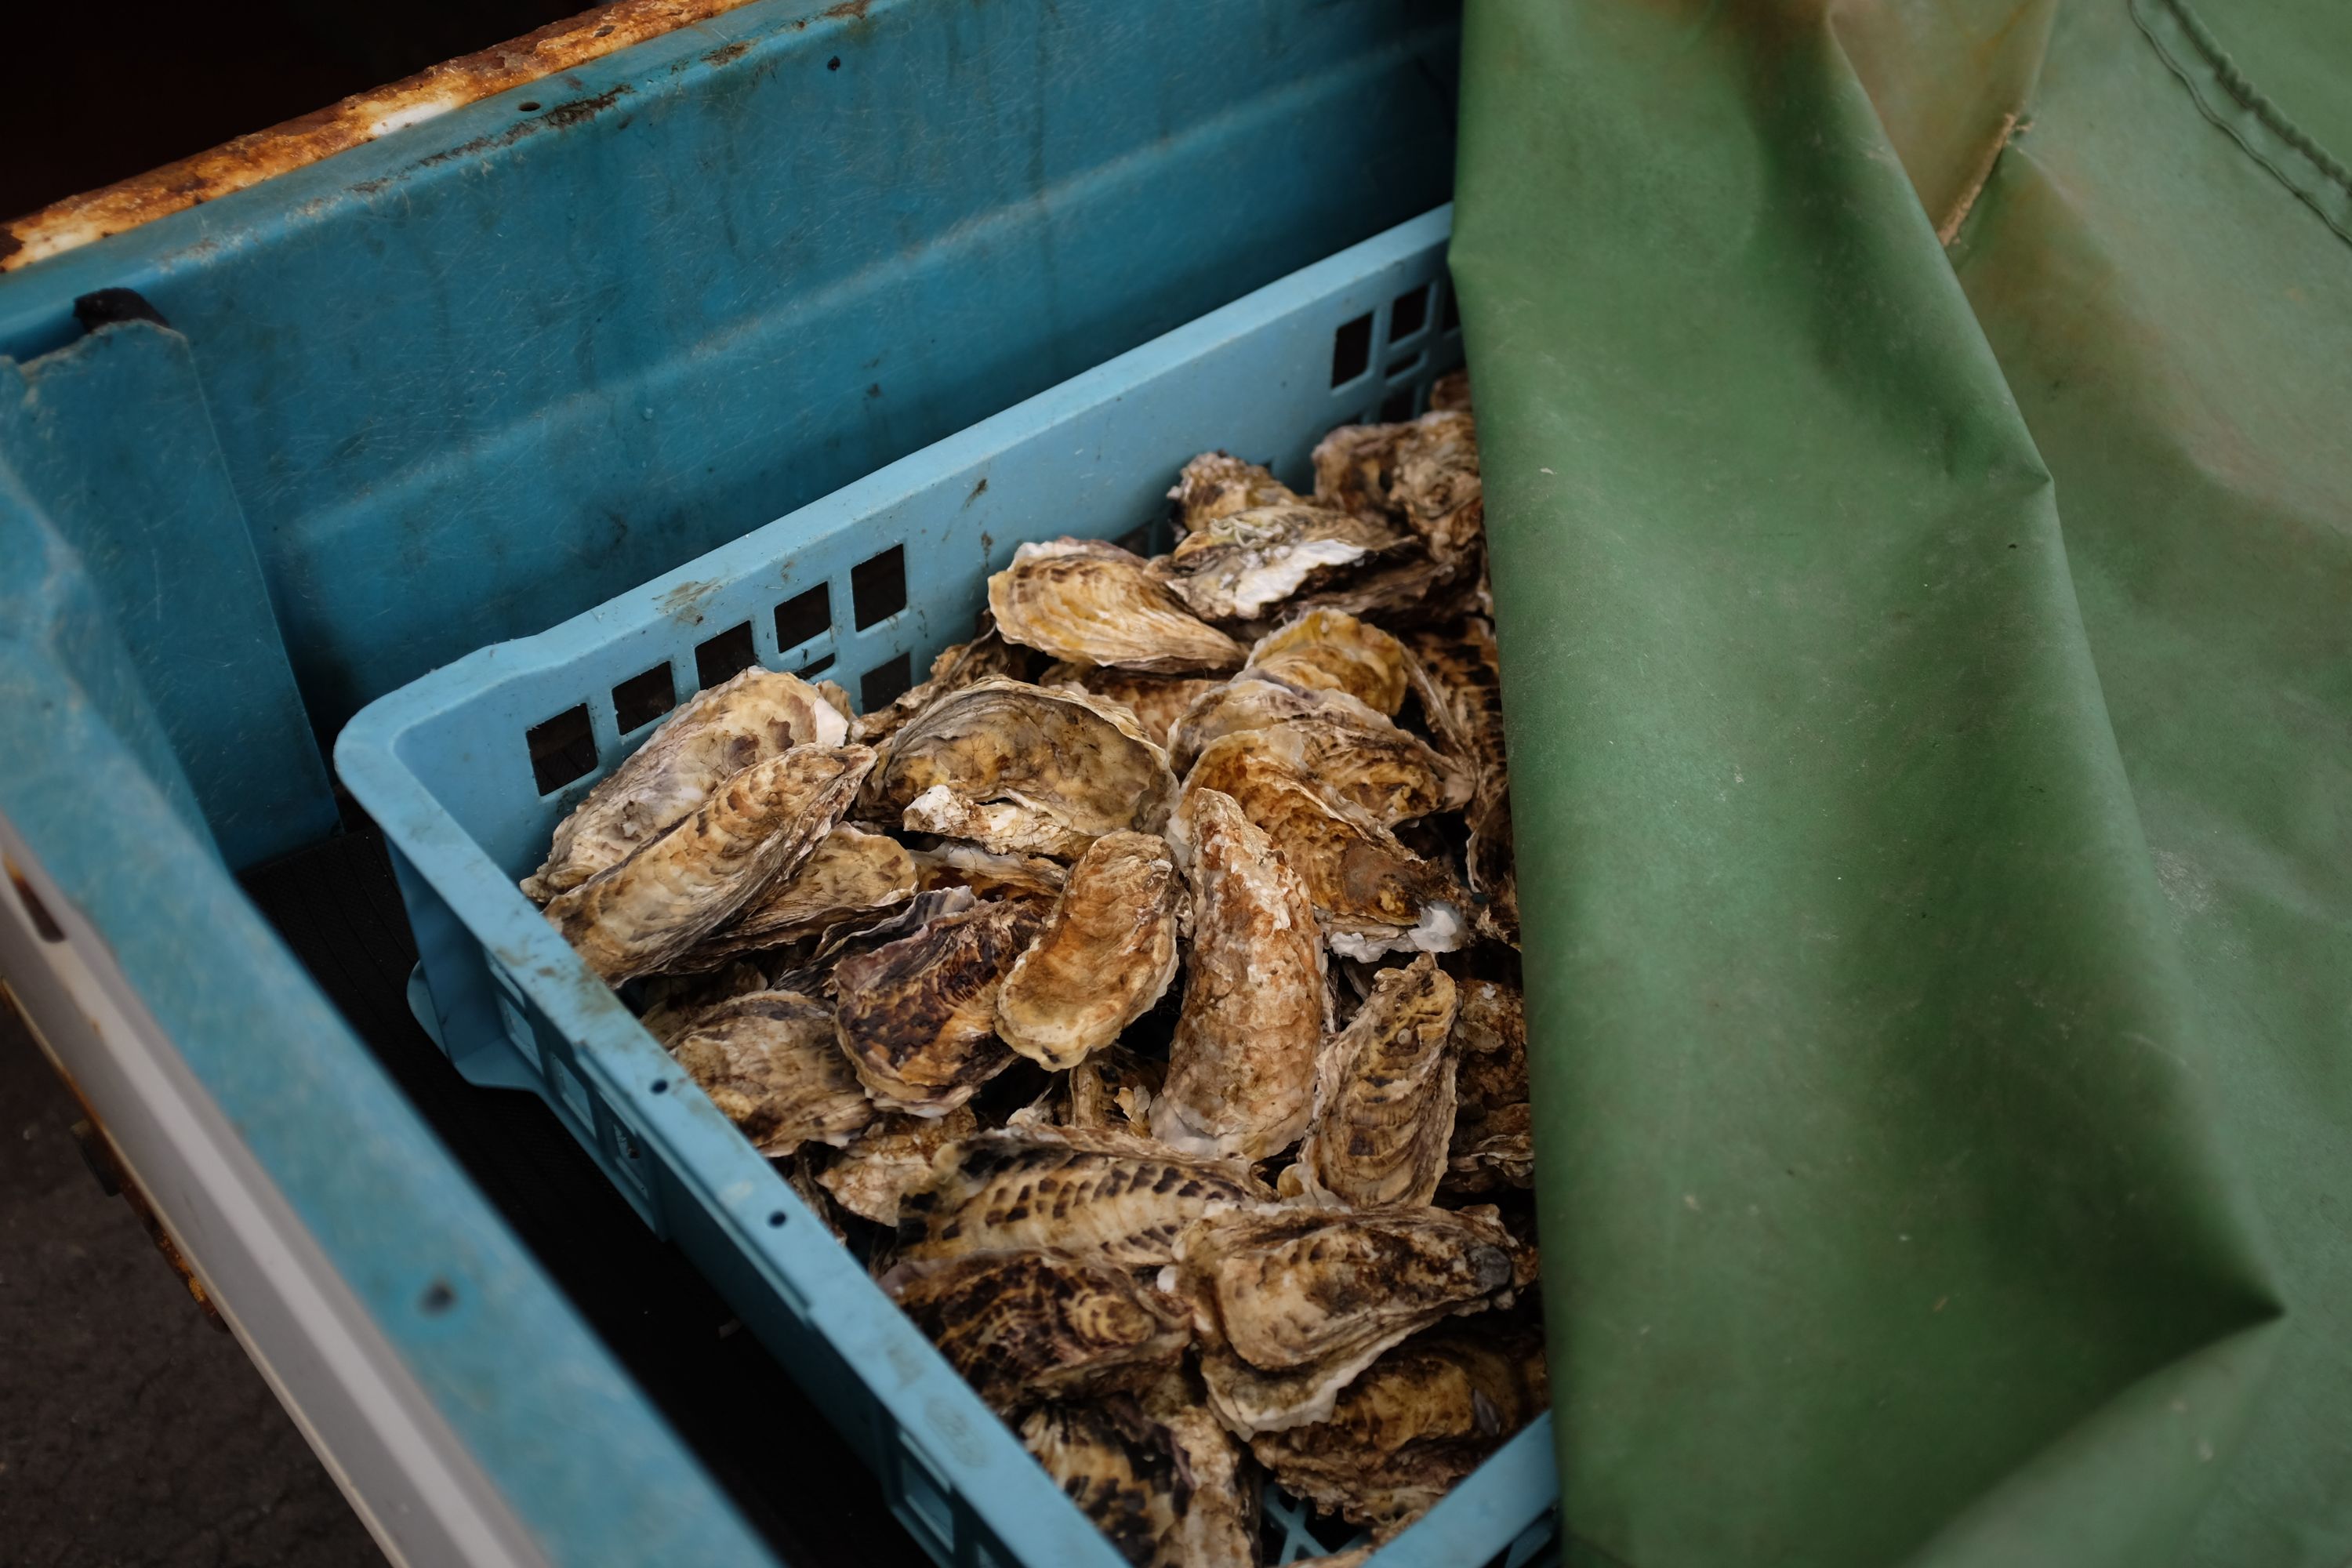 A plastic crate of oysters half-concealed by a green tarp.